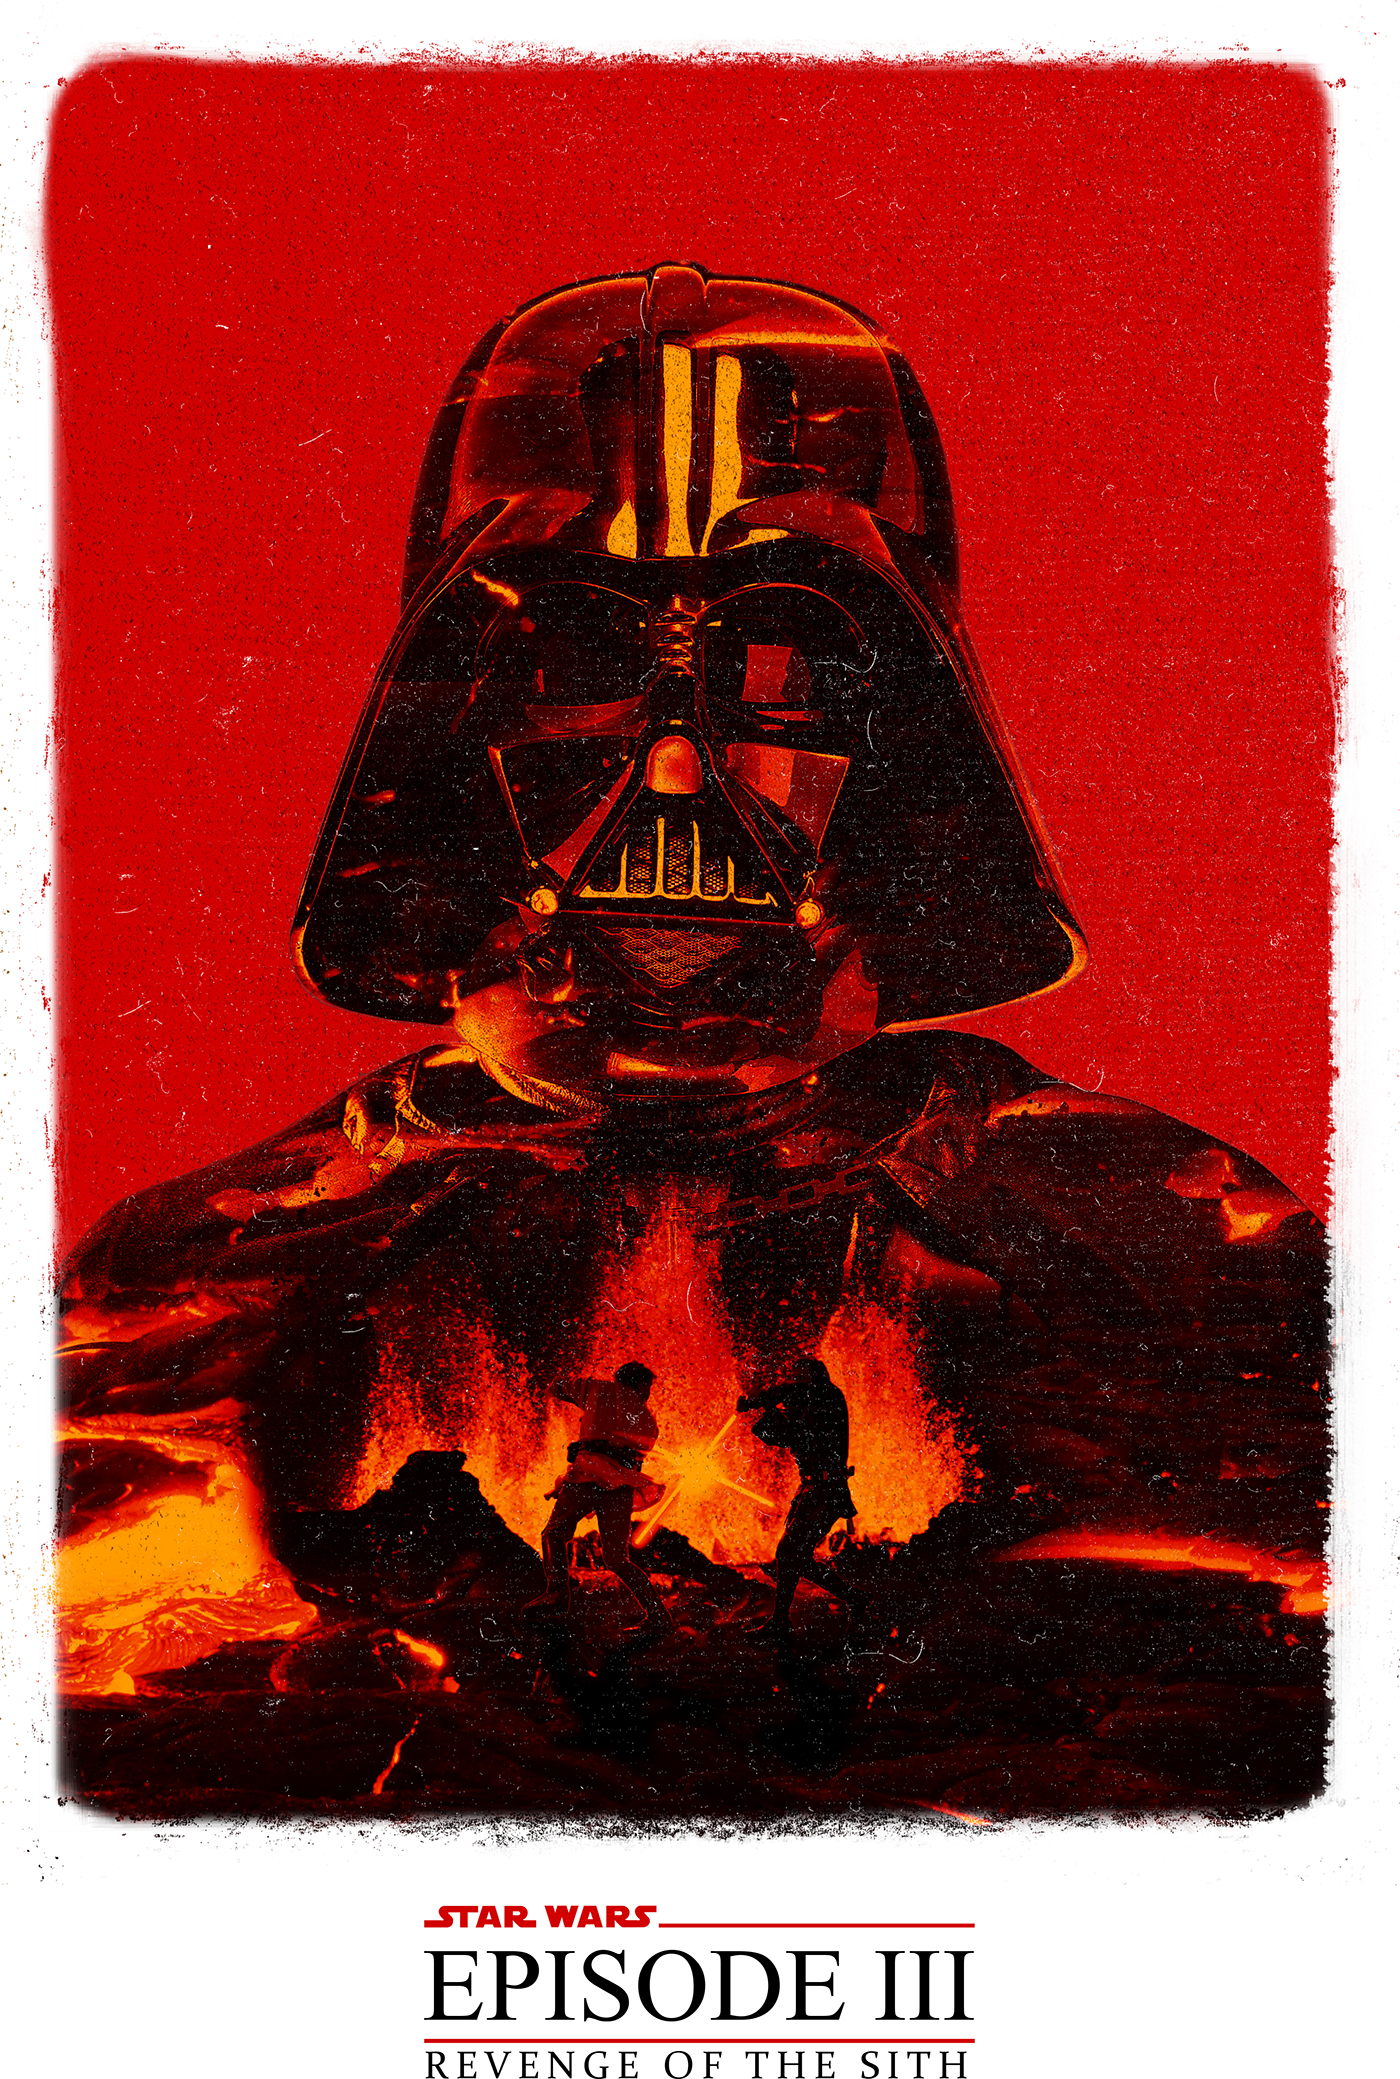 star wars Darth Maul darth vader poster may the force may4 be with yo Foto Montage photoshot jango fett movie poster